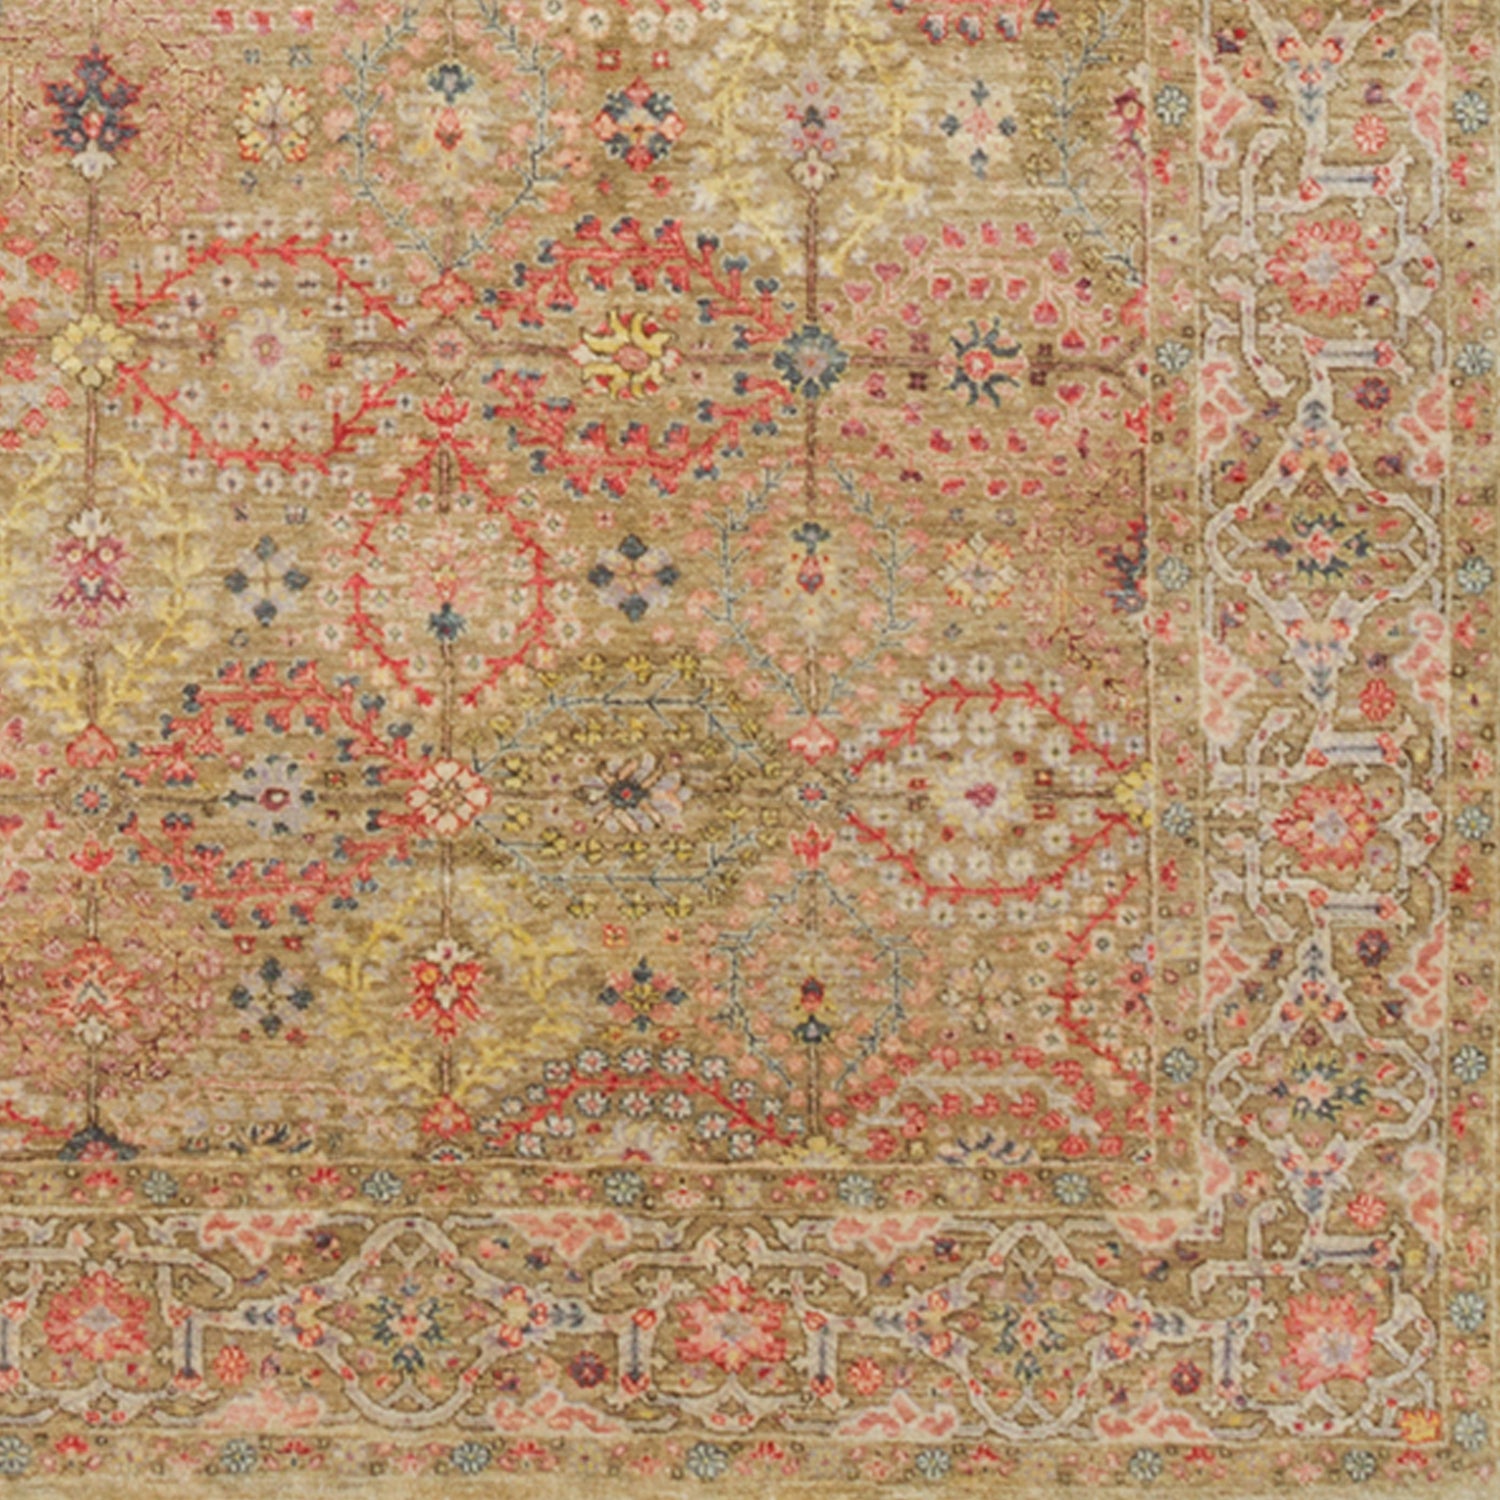 Woven rug swatch in a dense floral print with a floral paisley border in shades of pink, red, yellow and green on a tan field.